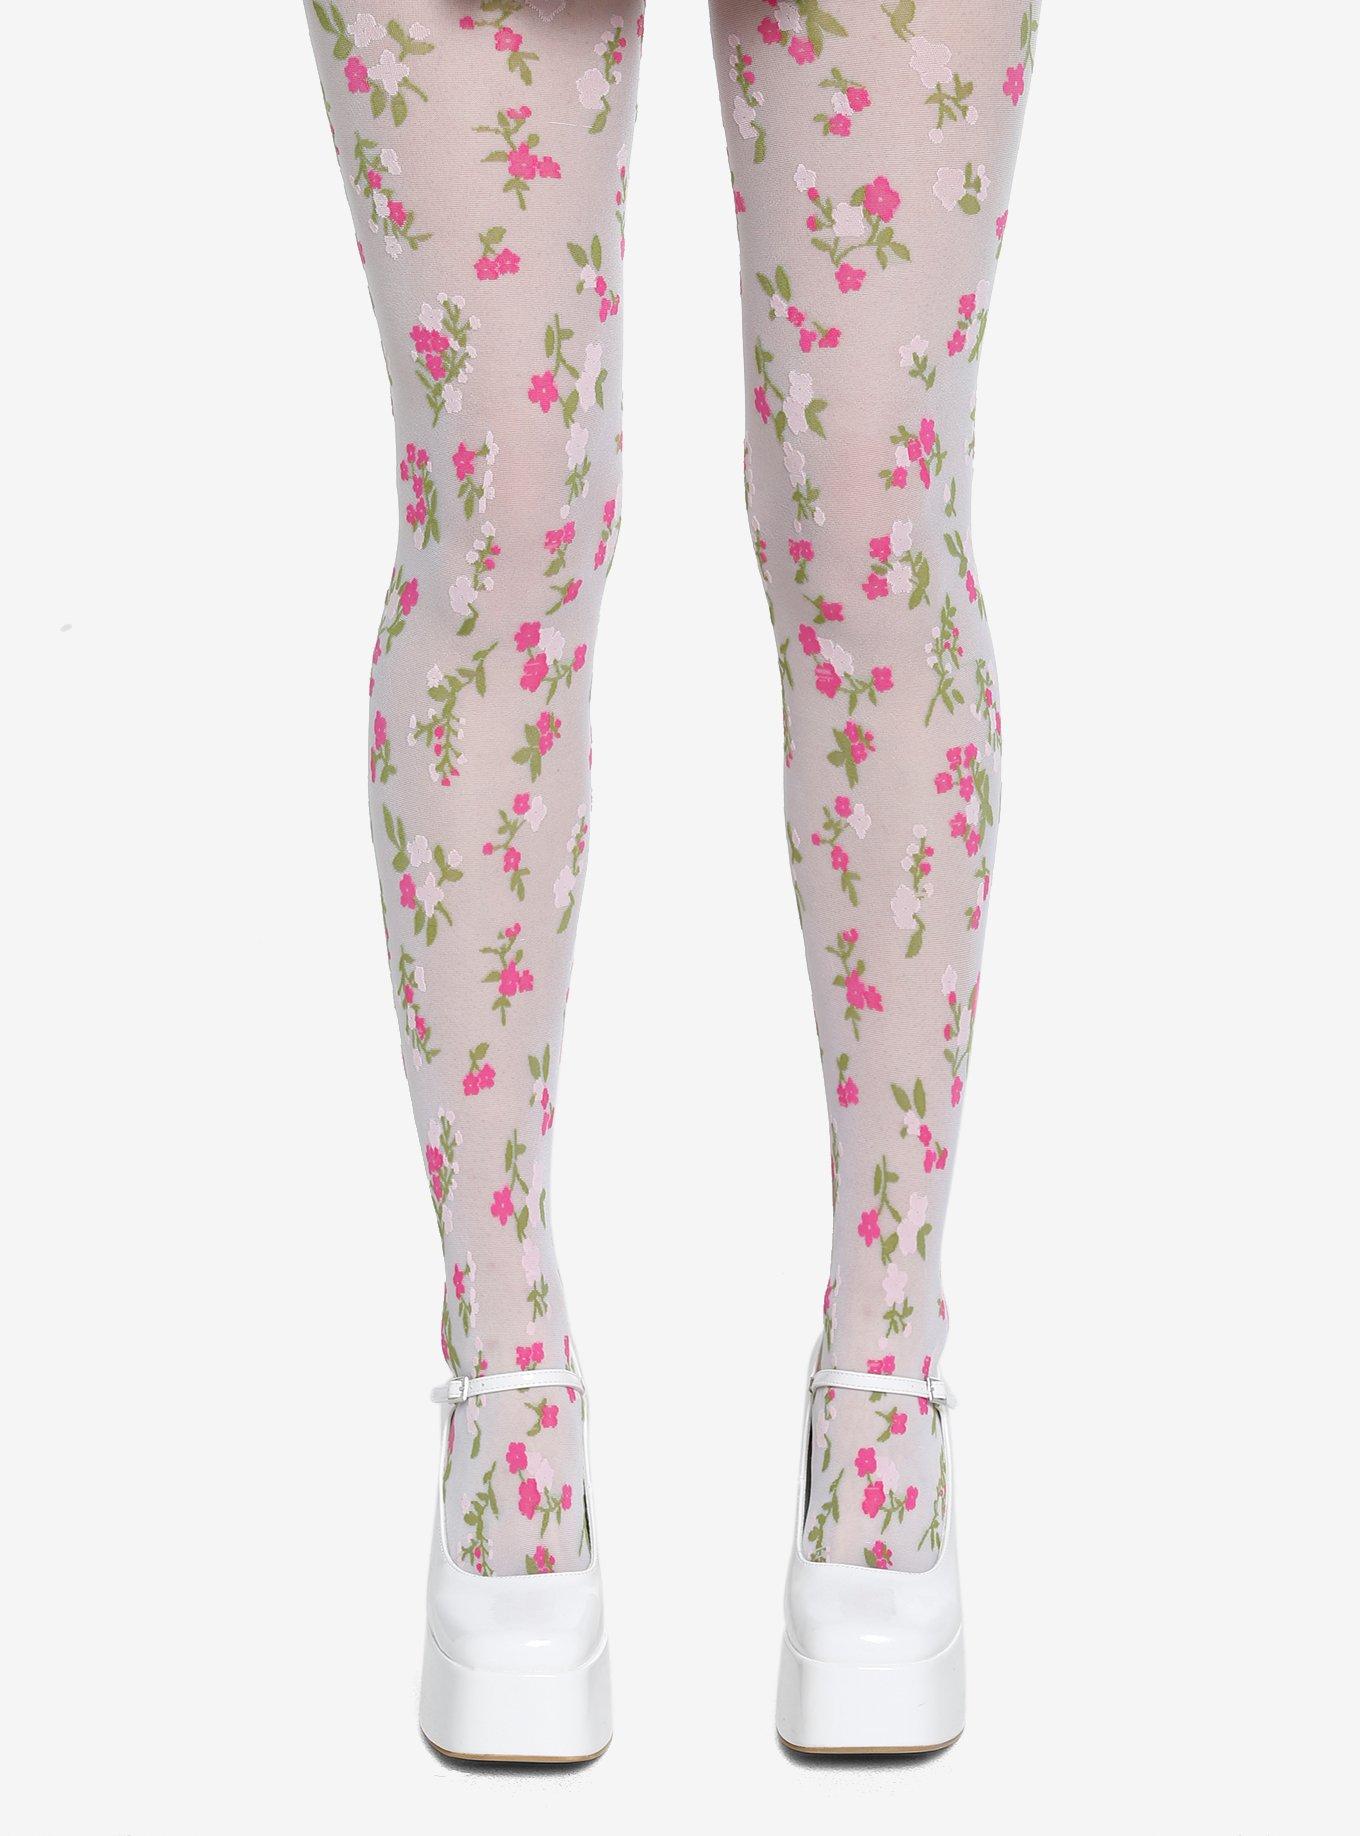 Colorful Floral Patterned Tights Garden, Opaque Flowers on Pantyhose  Perfect Gift for Mother's Day -  Canada